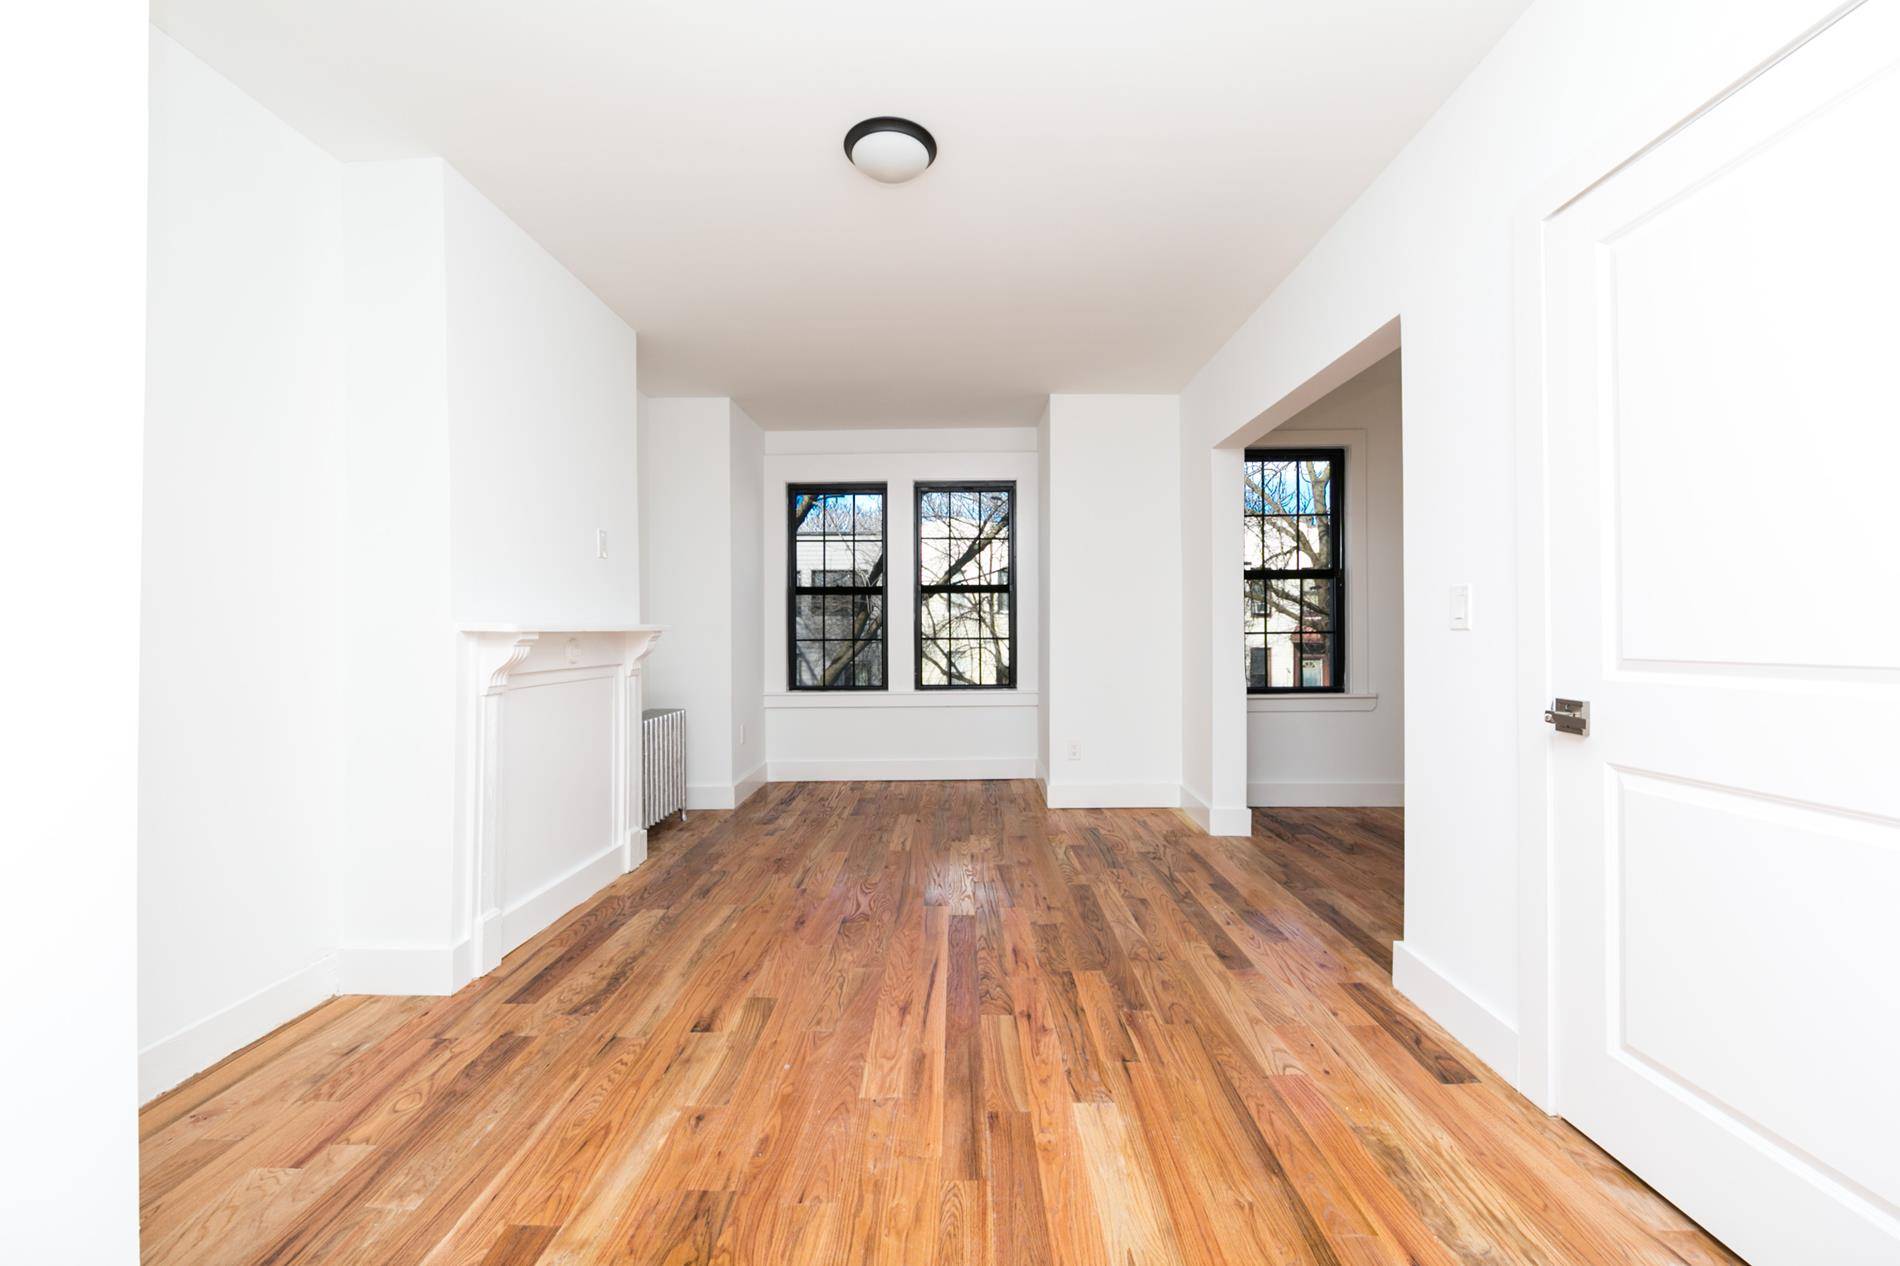 Now renting this fully renovated second floor 3 bedroom 1 bathroom apartment on a quiet tree lined street in Bushwick Brooklyn.